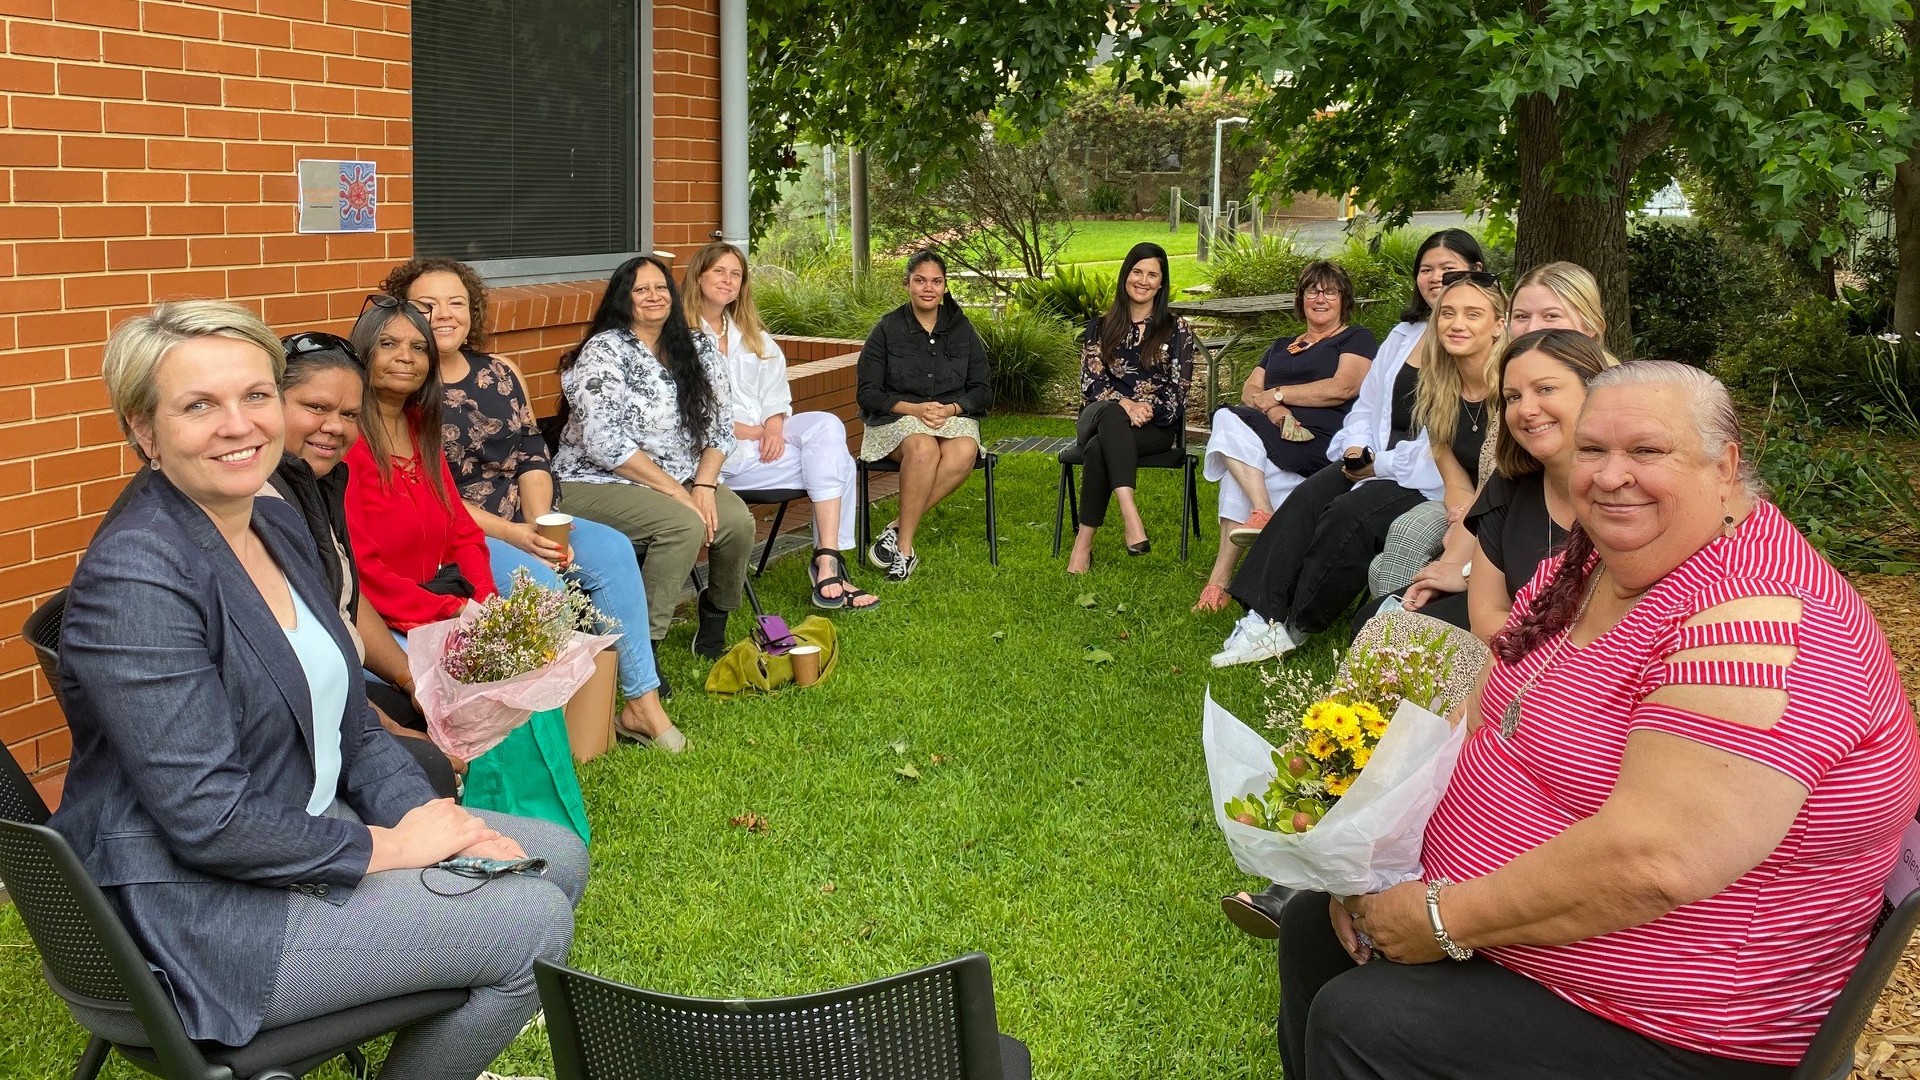 Tanya Plibersek and Kristy McBain take part in the Yarning Circle at UOW Bega. Pictured with a group of women sitting in a circle.